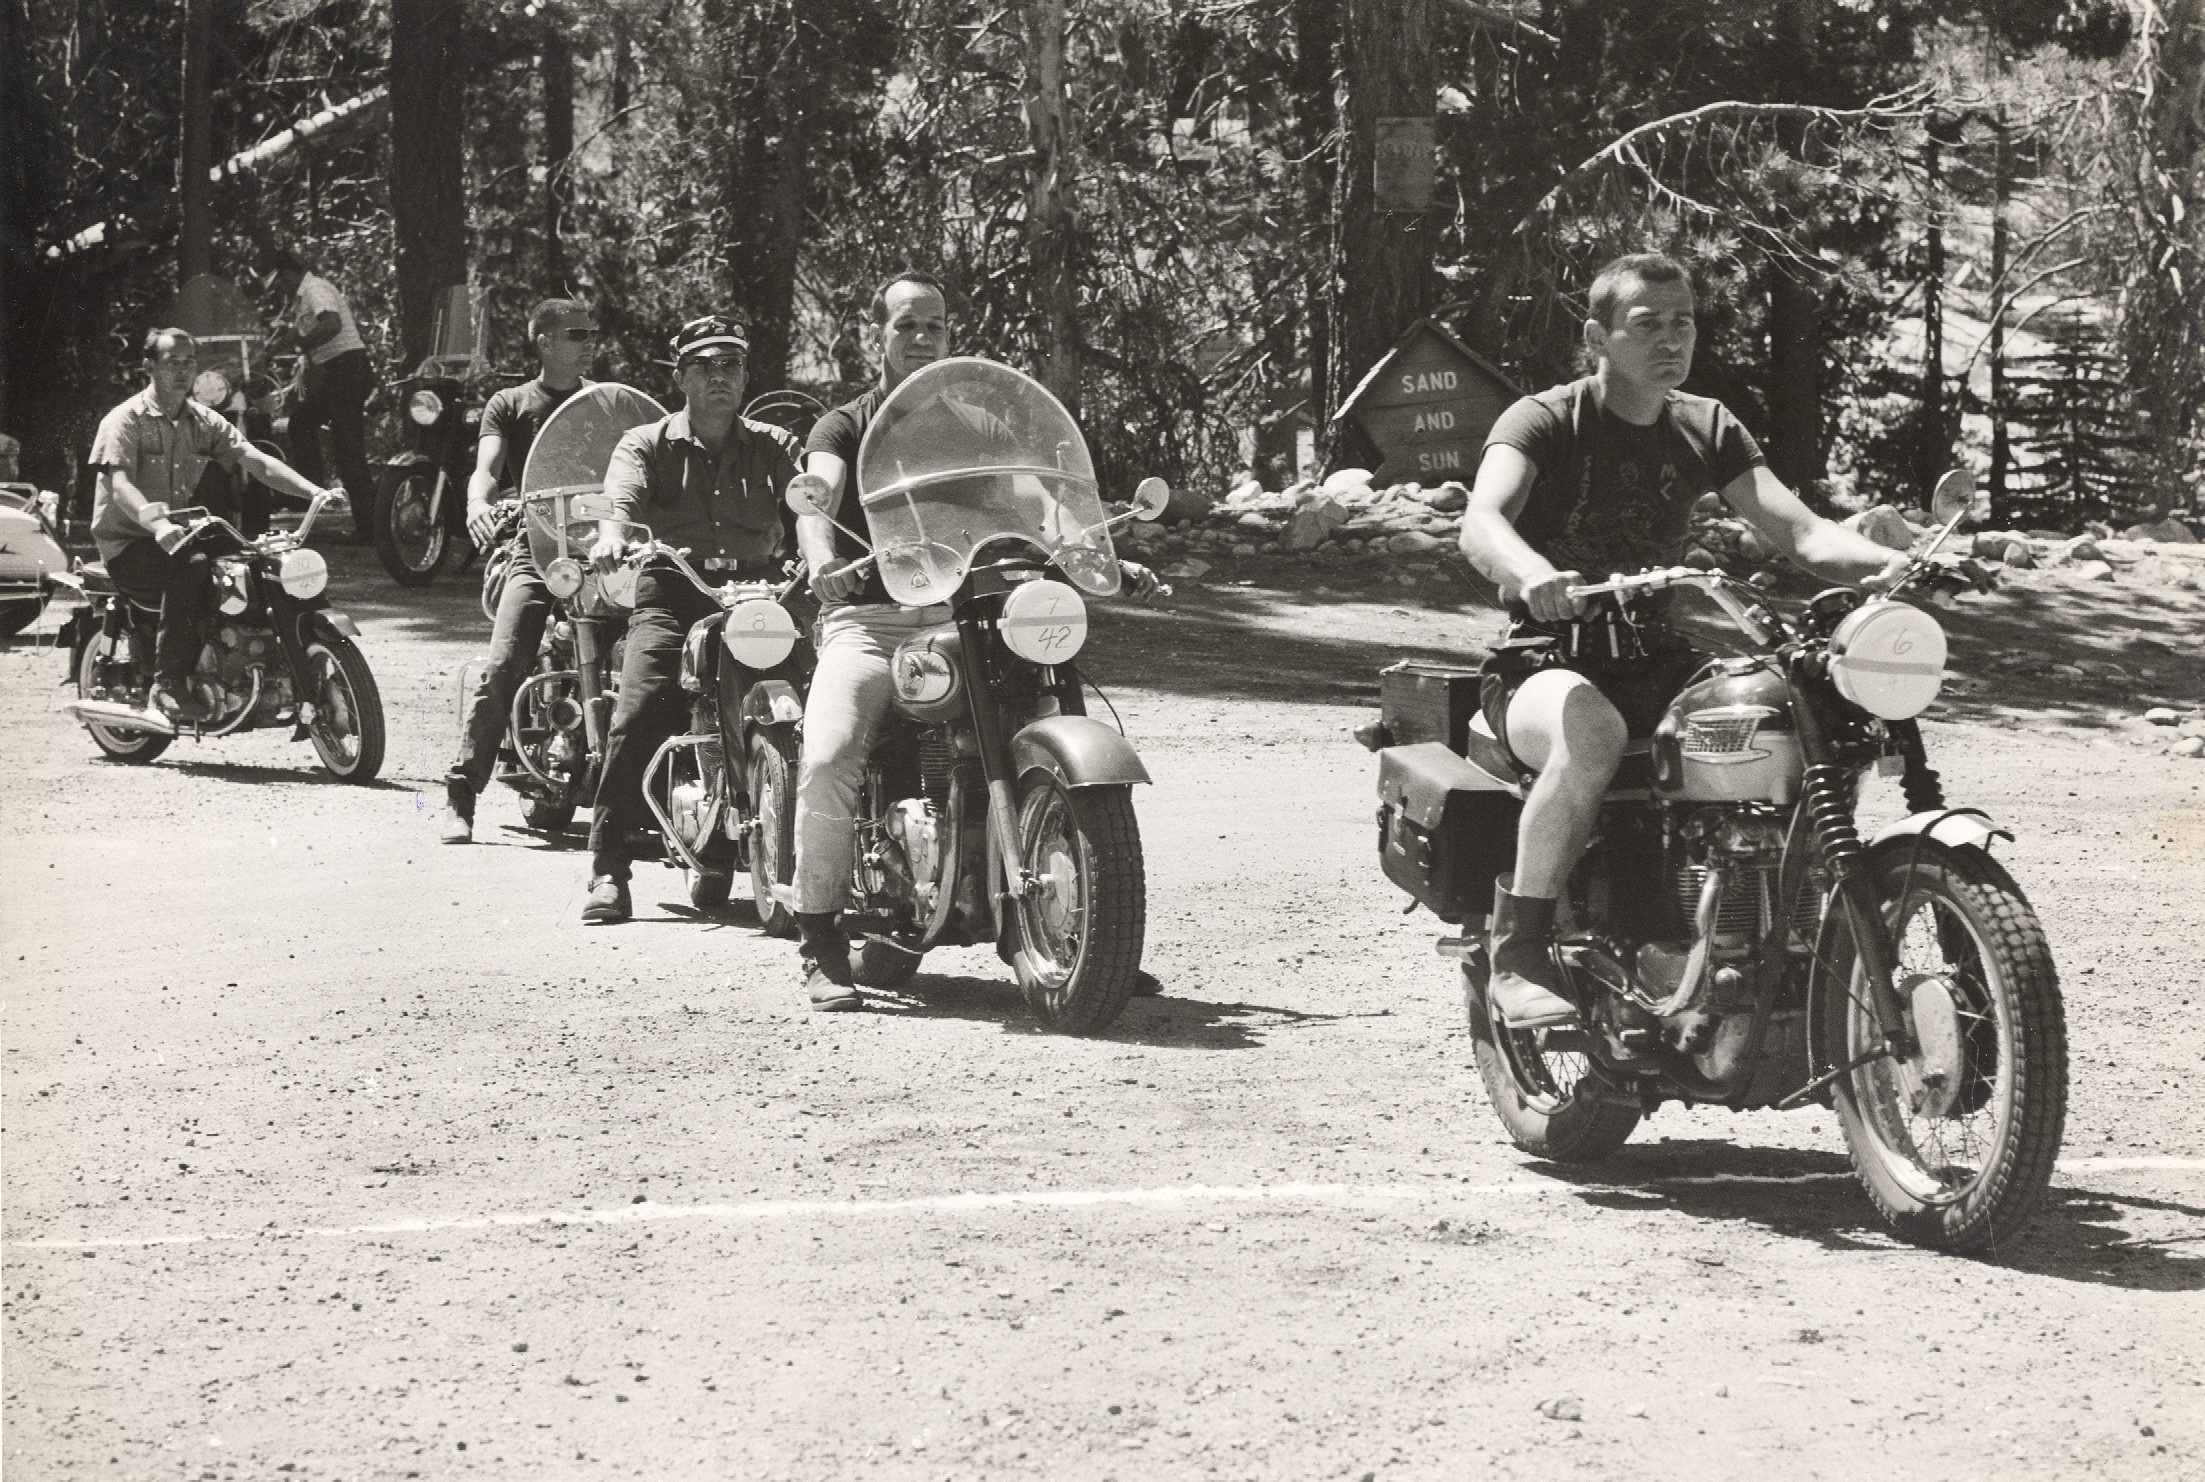 Satyrs Motorcycle Club rides into history